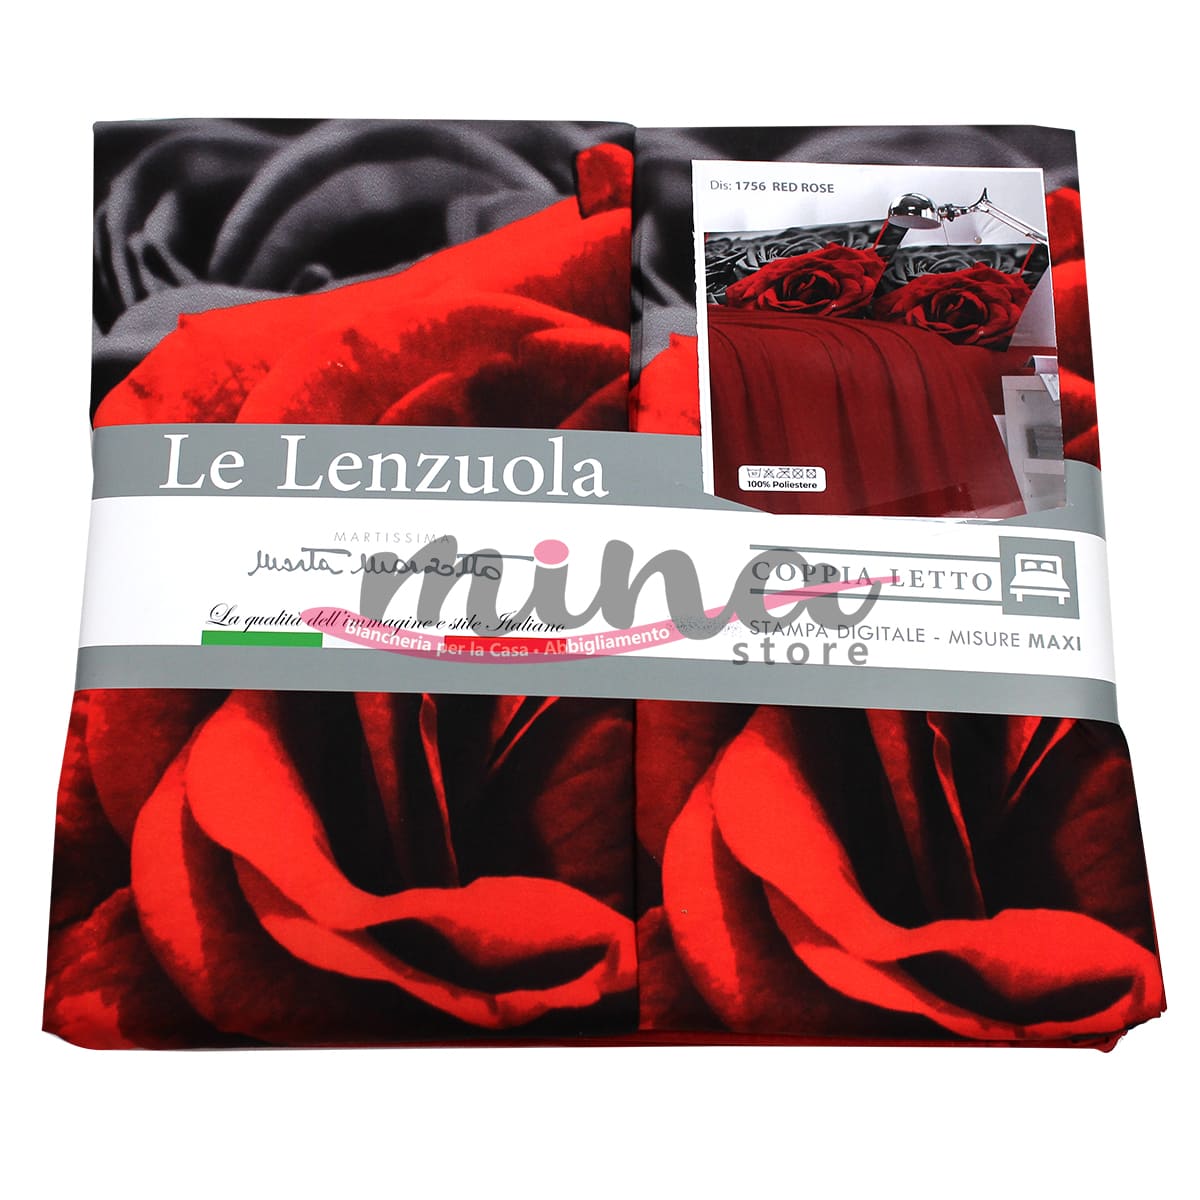 Completo Letto Matrimoniale stampa digitale 3D RED ROSE Marta Marzotto + 2 federe Made in Italy